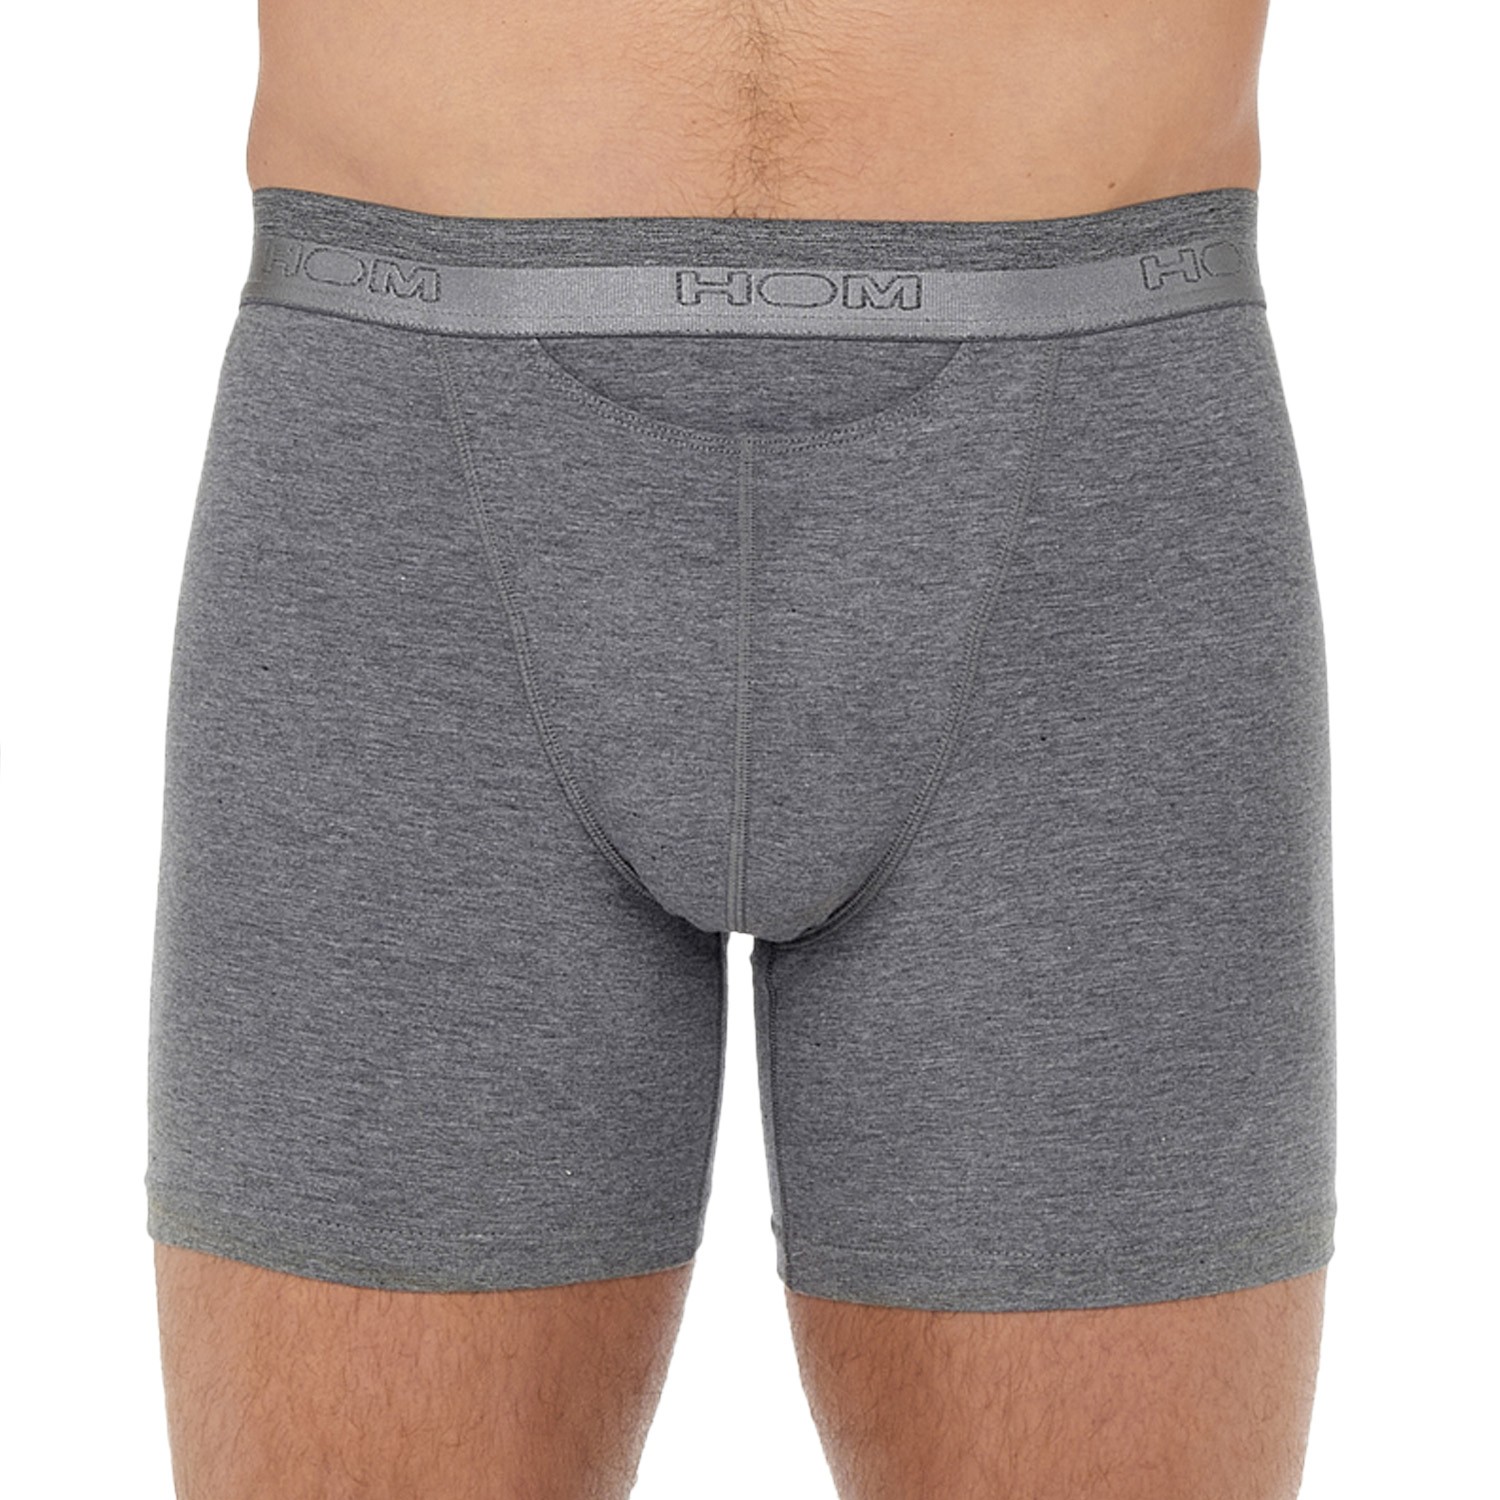 Boxer HO1 long Classic - grey: Boxers for man brand HOM for sale on